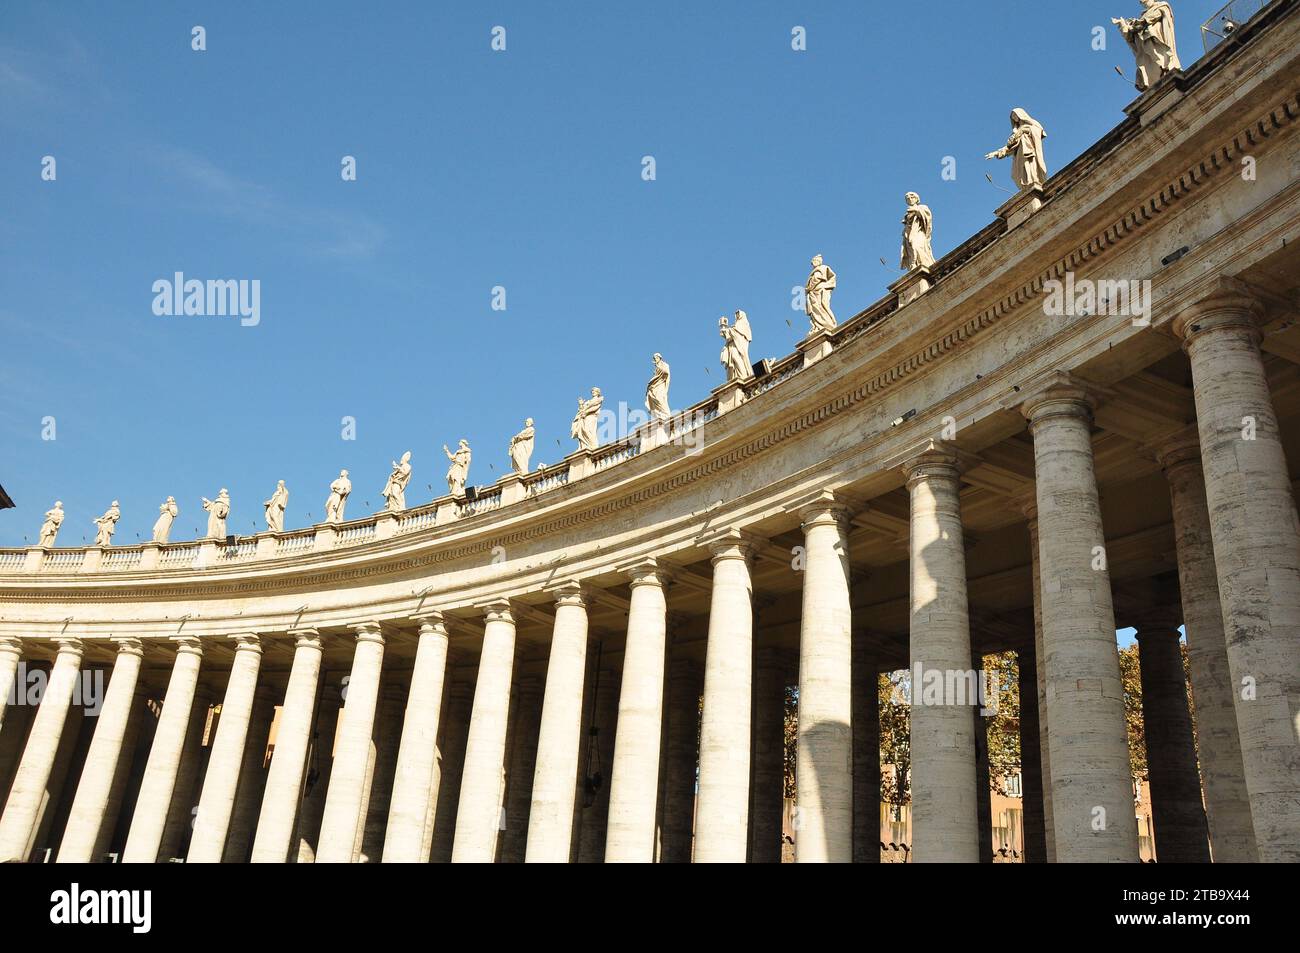 Bernini's colonnades and statues, Vatican, Rome Italy Stock Photo